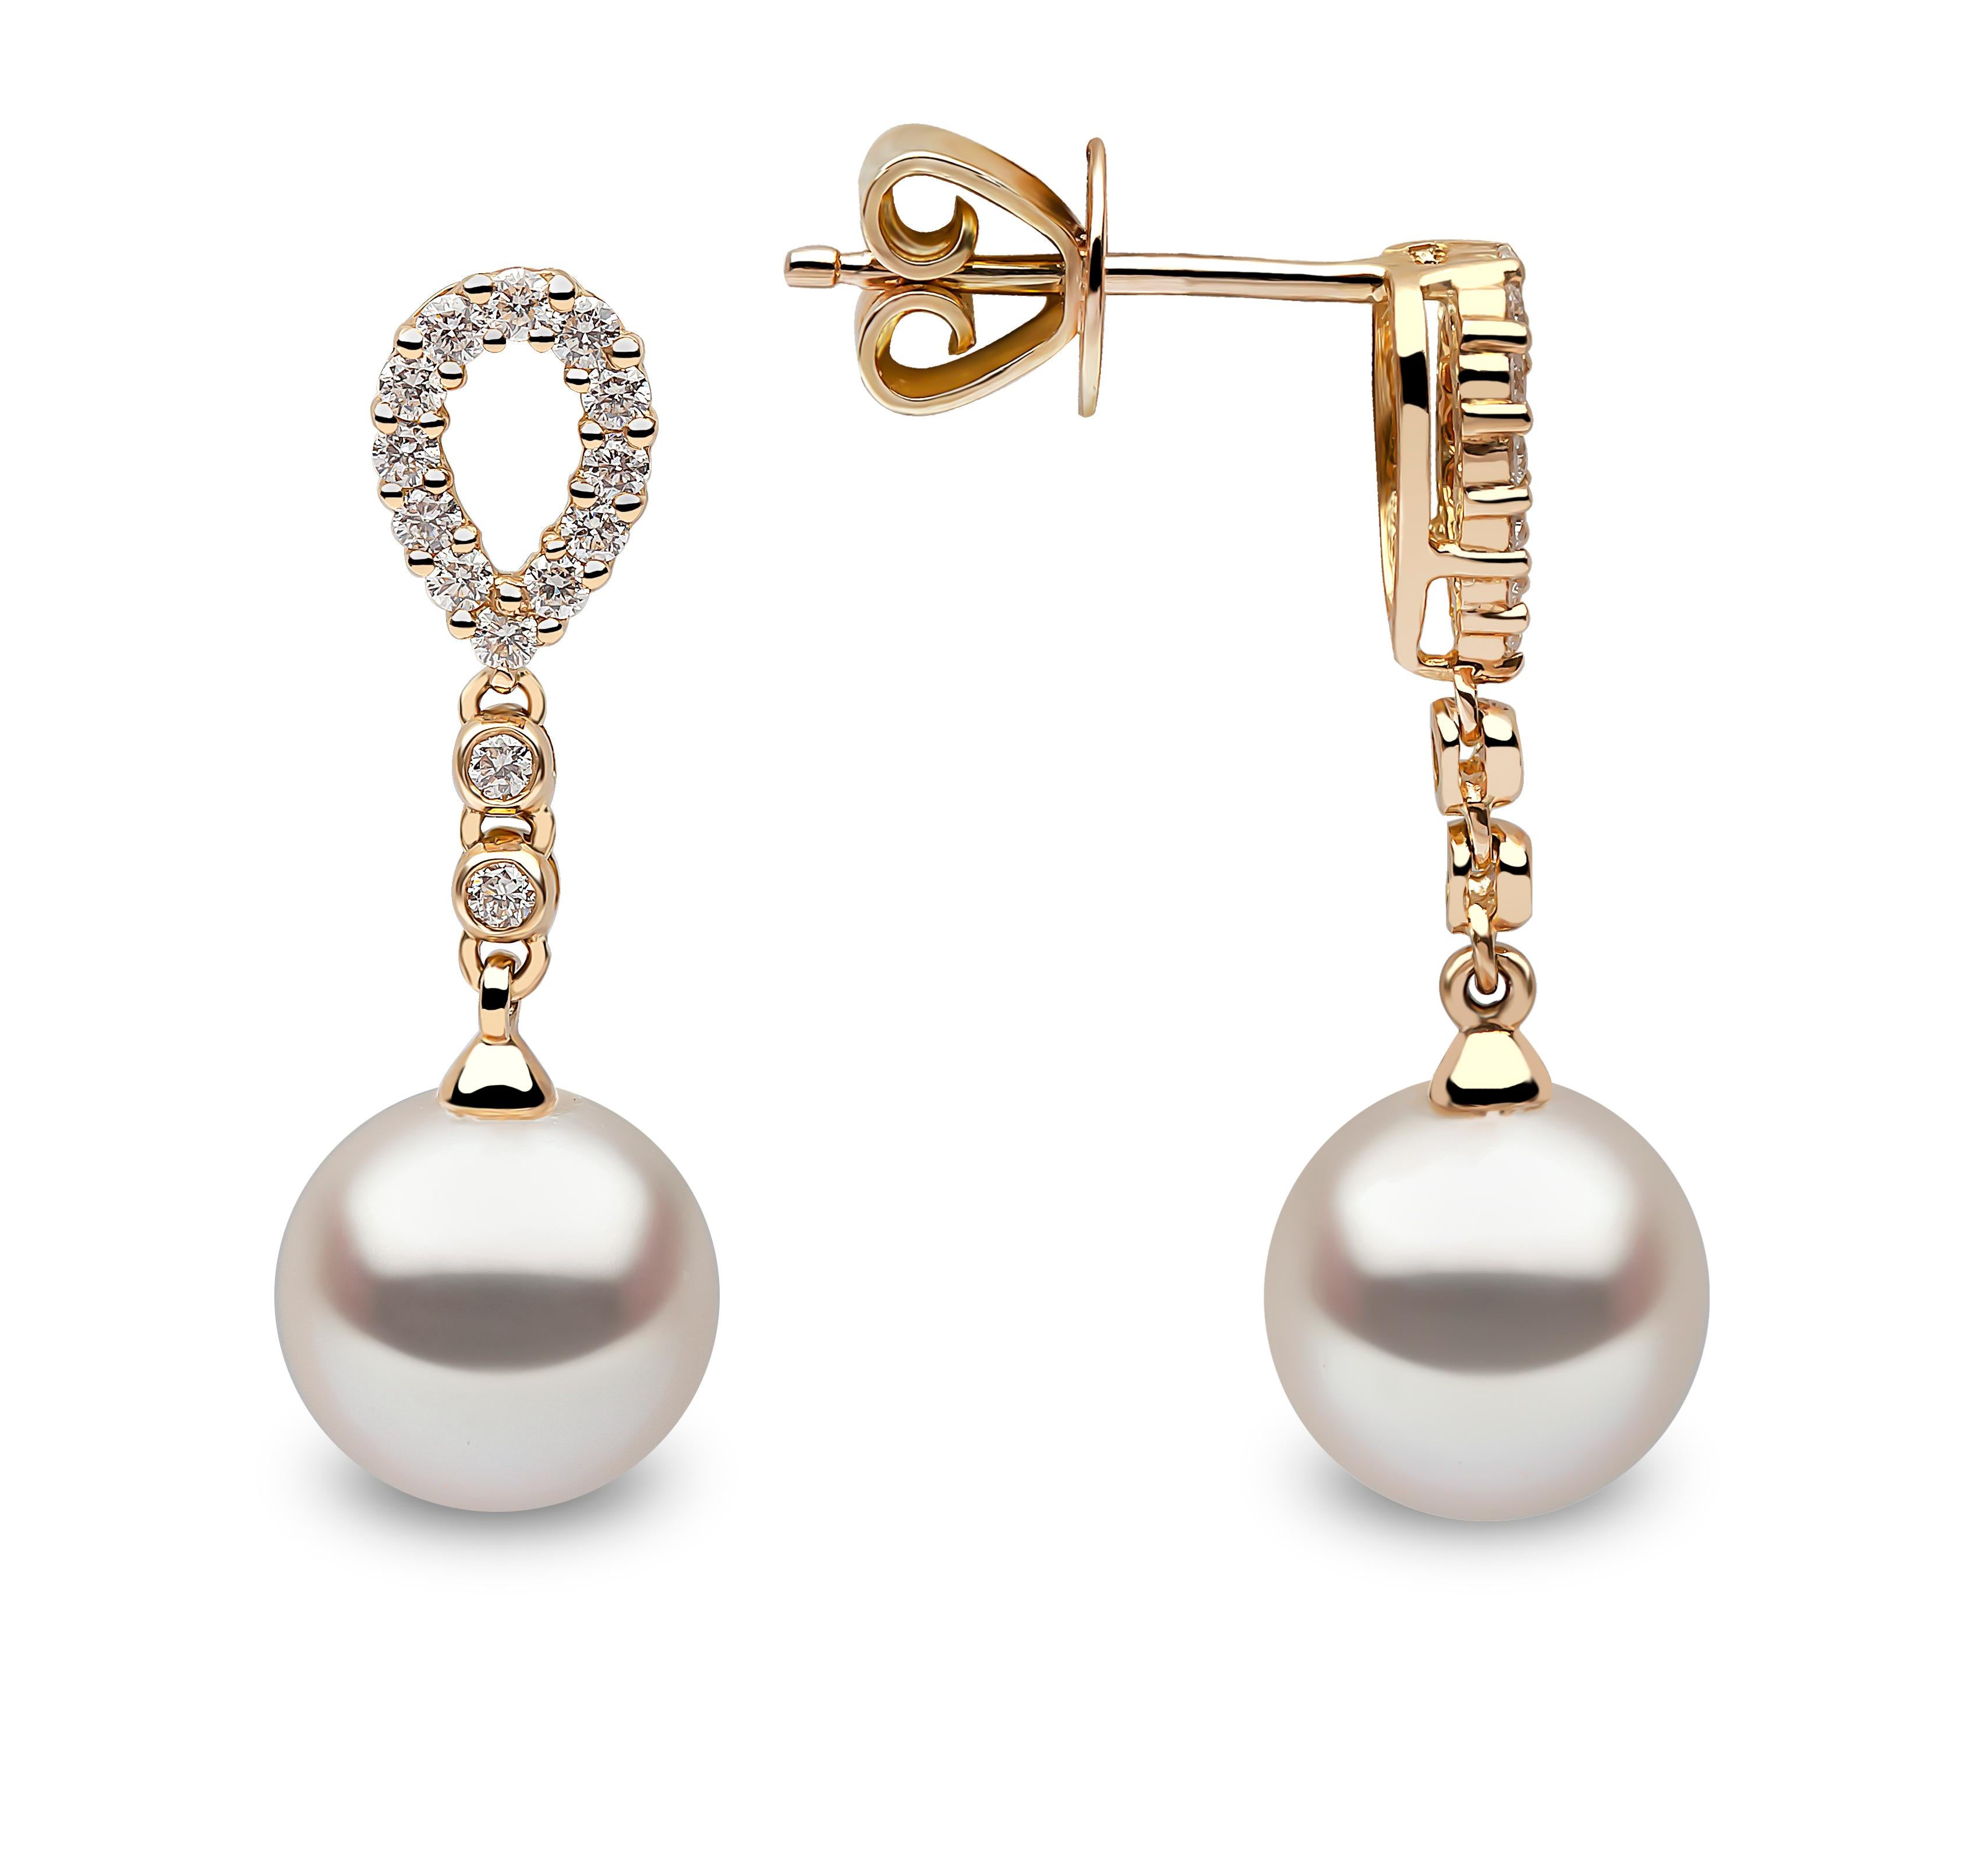 These delicate earrings by Yoko London features lustrous Freshwater pearls beneath an elegant arrangement of diamonds. The 18 Karat Yellow Gold setting perfectly enriches the white colour of the diamonds and the lustre of the pearls. These graceful